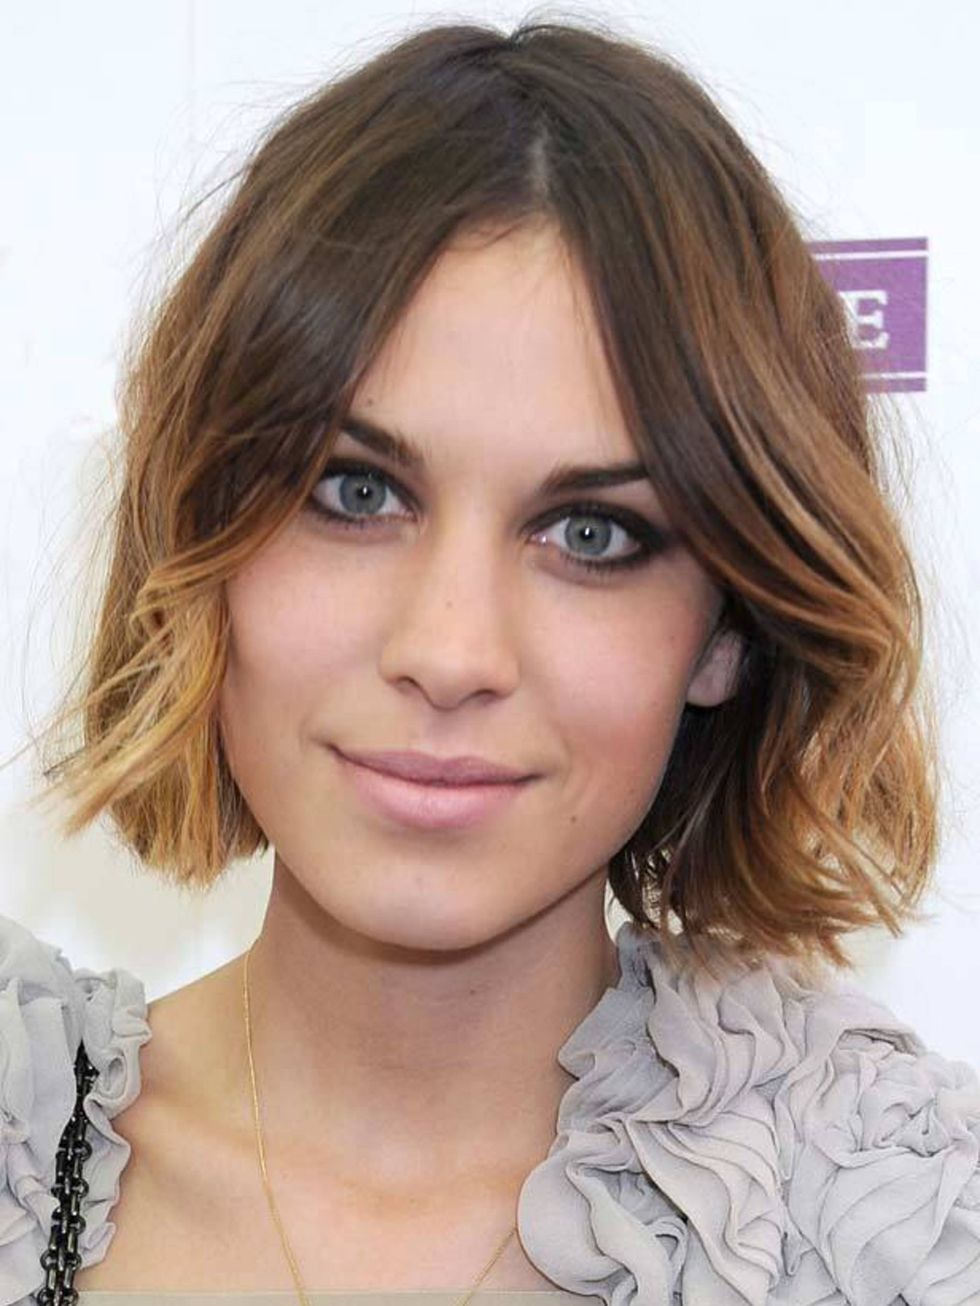 <p><a href="http://www.elleuk.com/starstyle/style-files/%28section%29/Alexa-Chung">Alexa</a> takes her hair inspiration from 1960s actress <a href="http://www.elleuk.com/beauty/hair/hair-features/%28section%29/how-to-get-the-hairstyle-you-want">Jane Birki